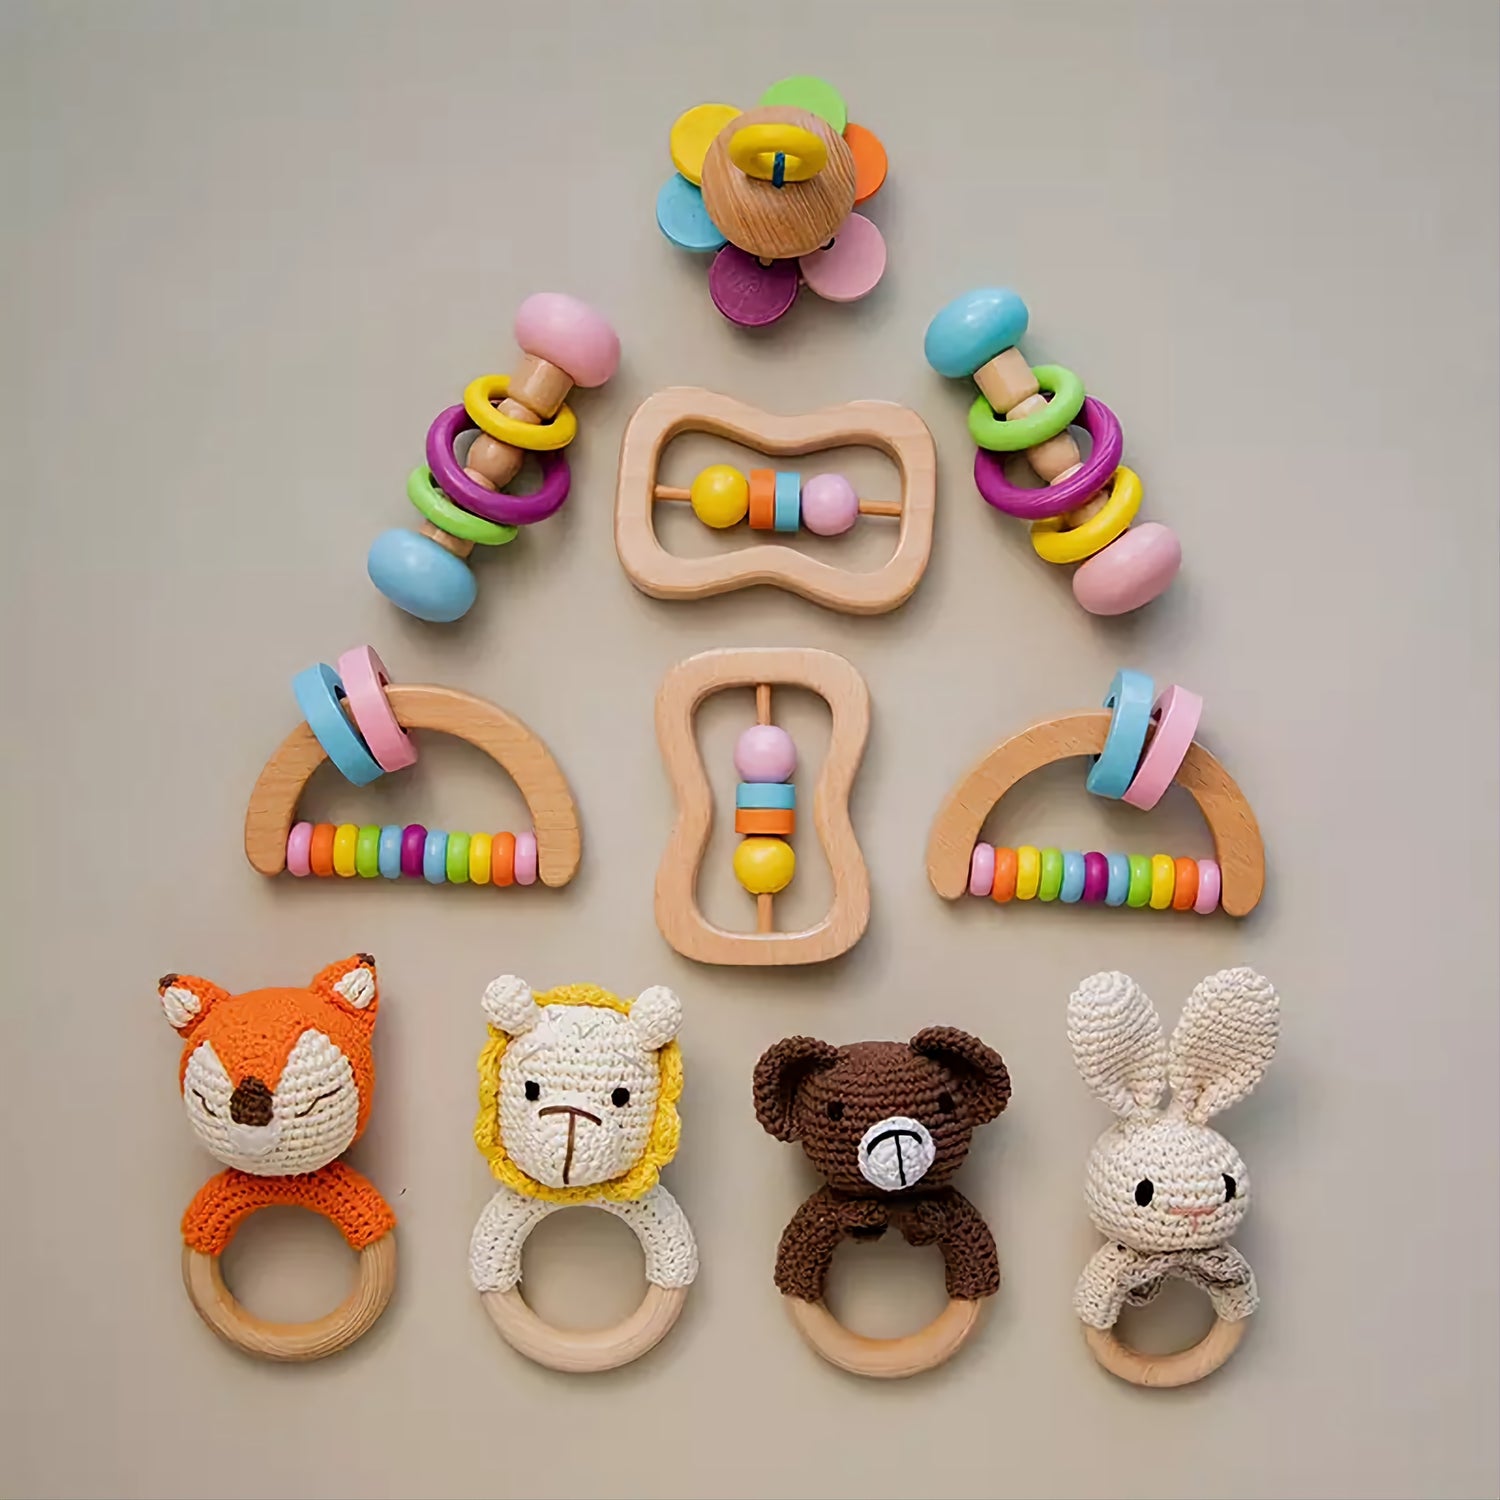 Colorful wooden montessori toy set for babies with animal rattles made of crochet and natural wood